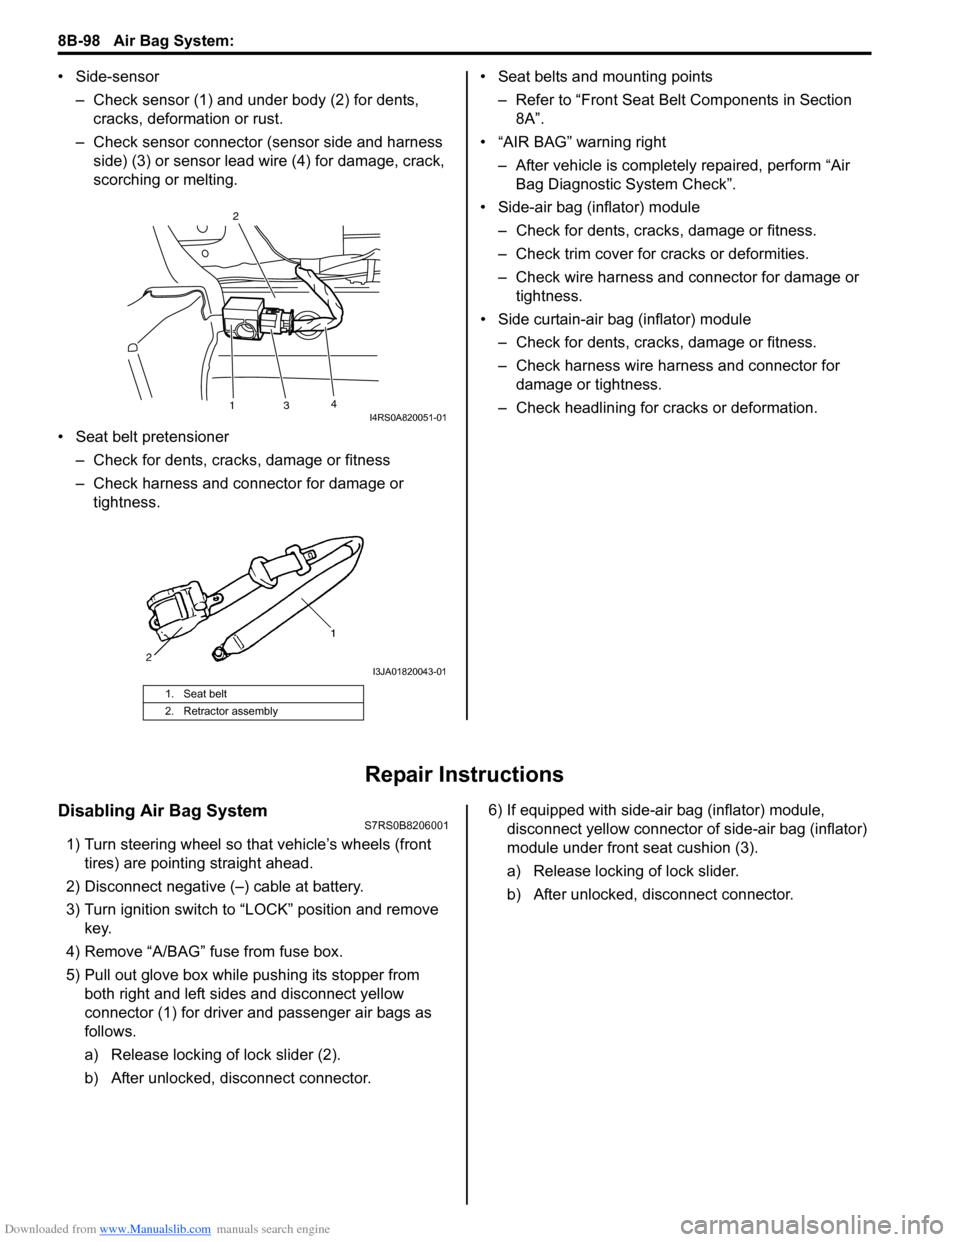 SUZUKI SWIFT 2006 2.G Service Manual PDF Downloaded from www.Manualslib.com manuals search engine 8B-98 Air Bag System: 
• Side-sensor– Check sensor (1) and under body (2) for dents, cracks, deformation or rust.
– Check sensor connecto